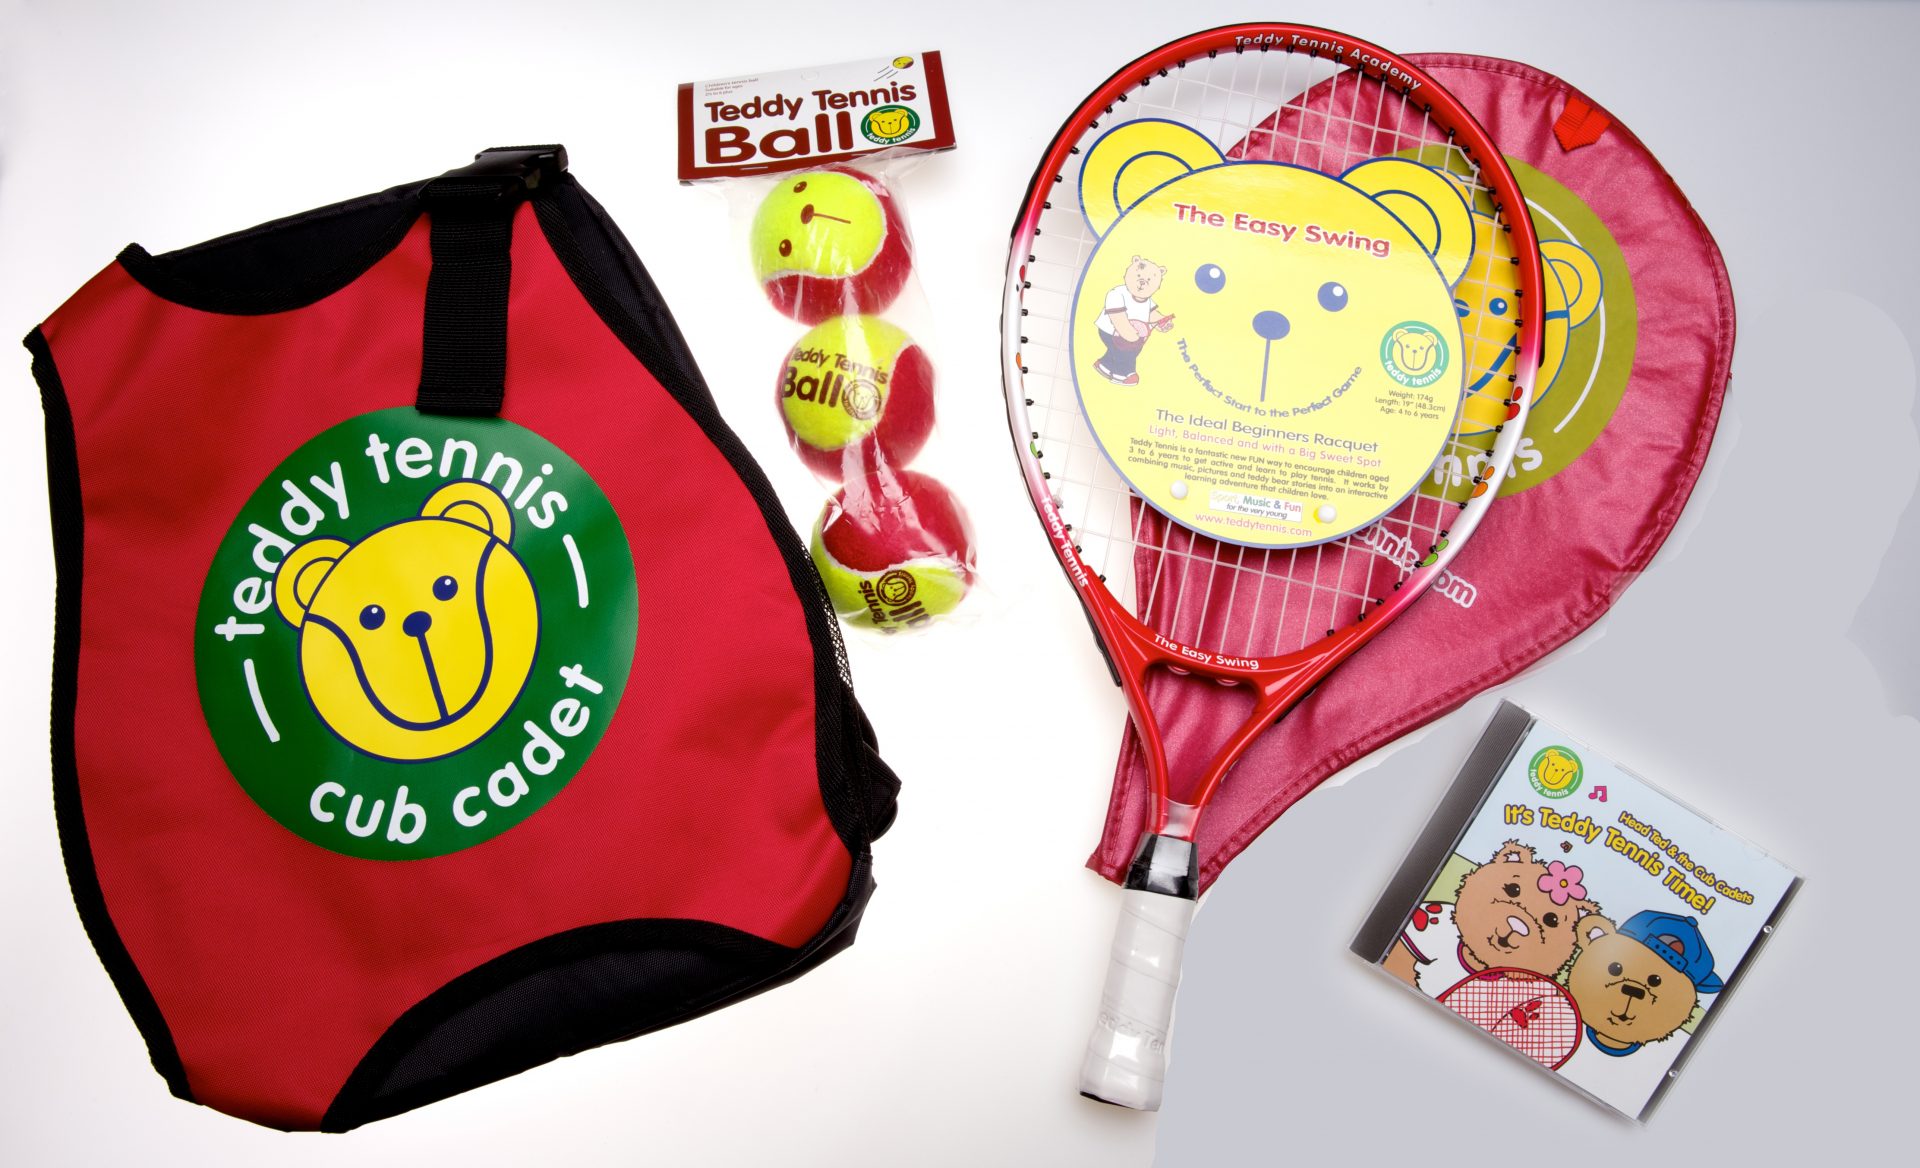 Tennis set for children aged 4 to 6 years